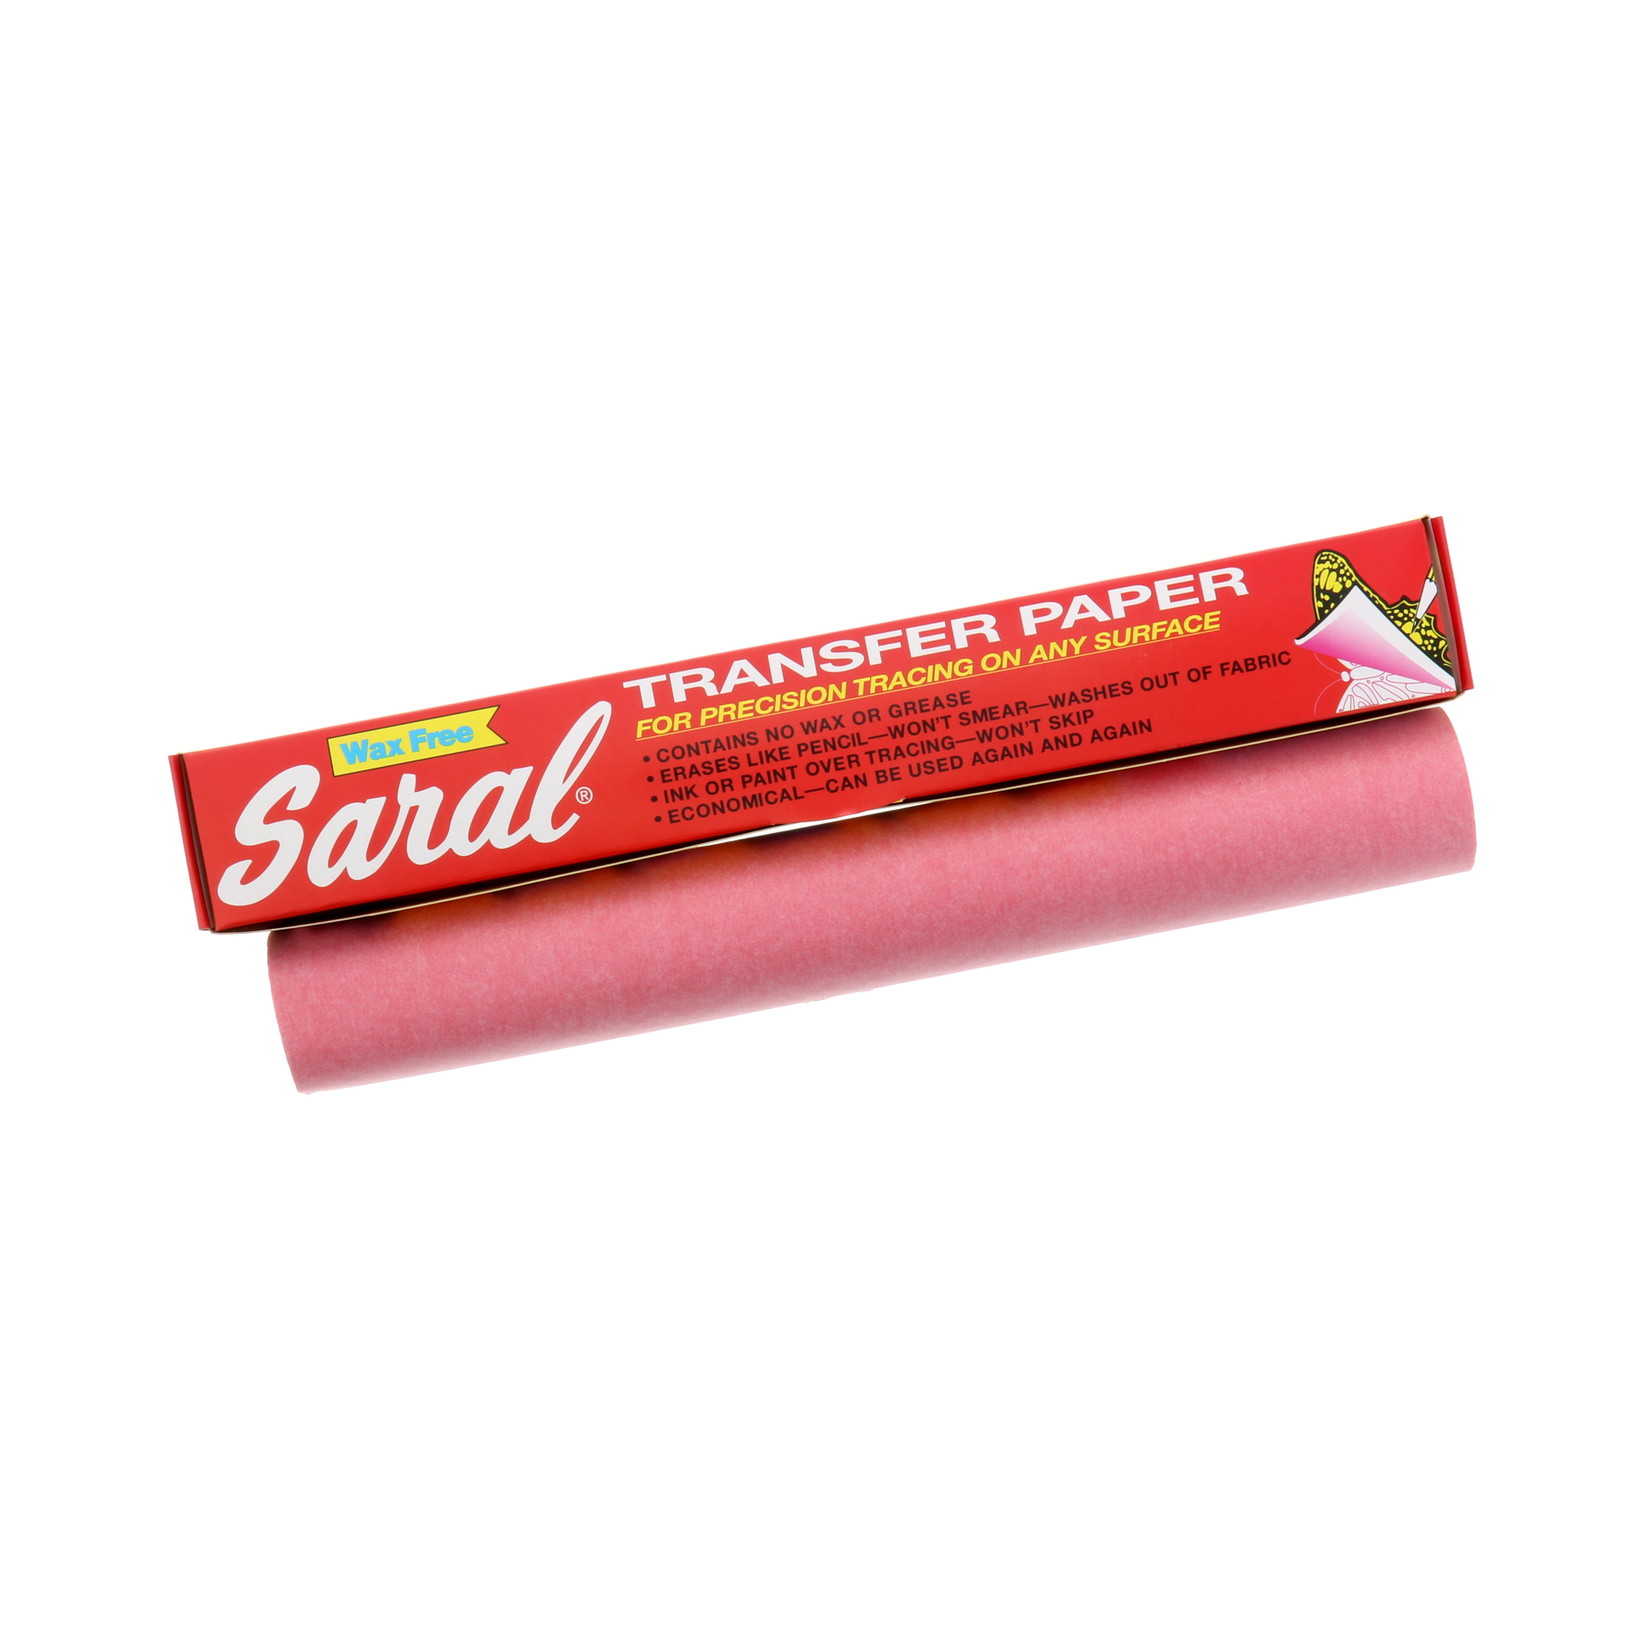 SARAL TRANSFER PAPER 12" X 12 FT RED